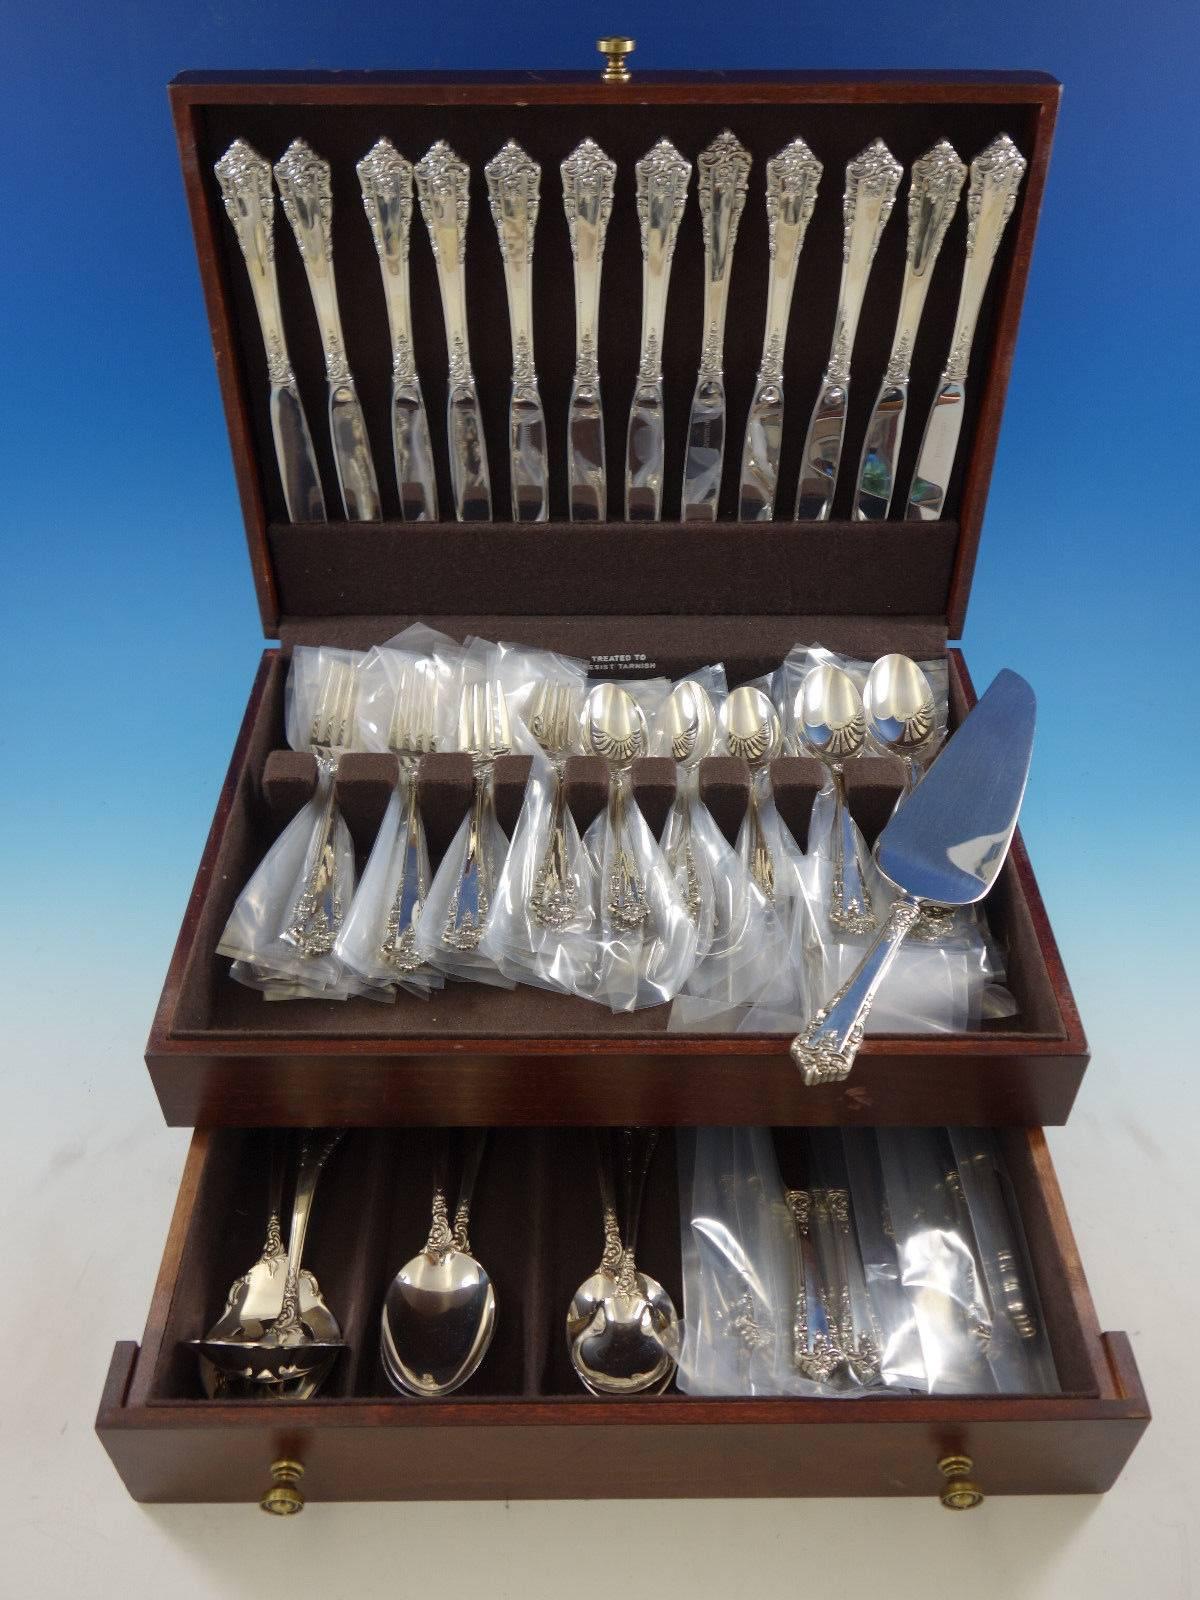 Rondelay by Lunt sterling silver flatware set of 80 pieces. This set includes: 

12 knives, 9 1/4